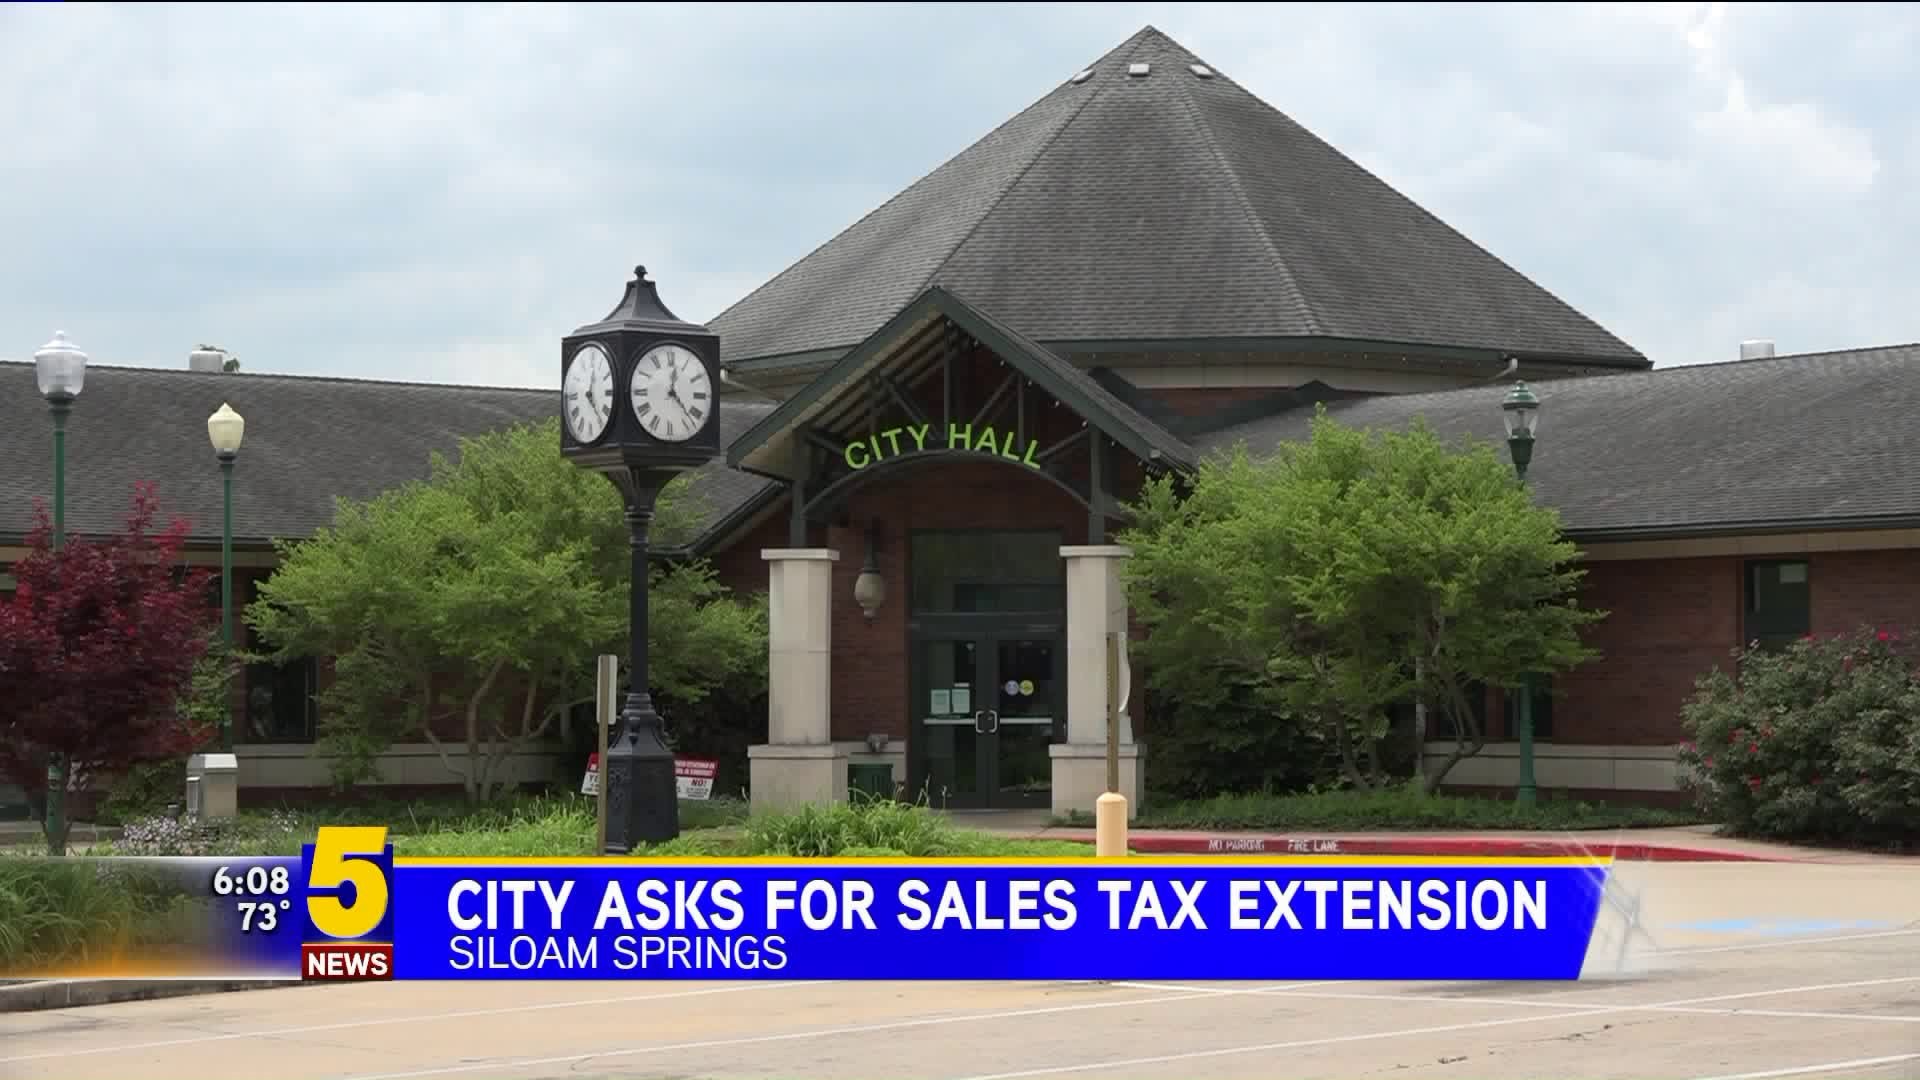 City Asks For Sales Tax Extension